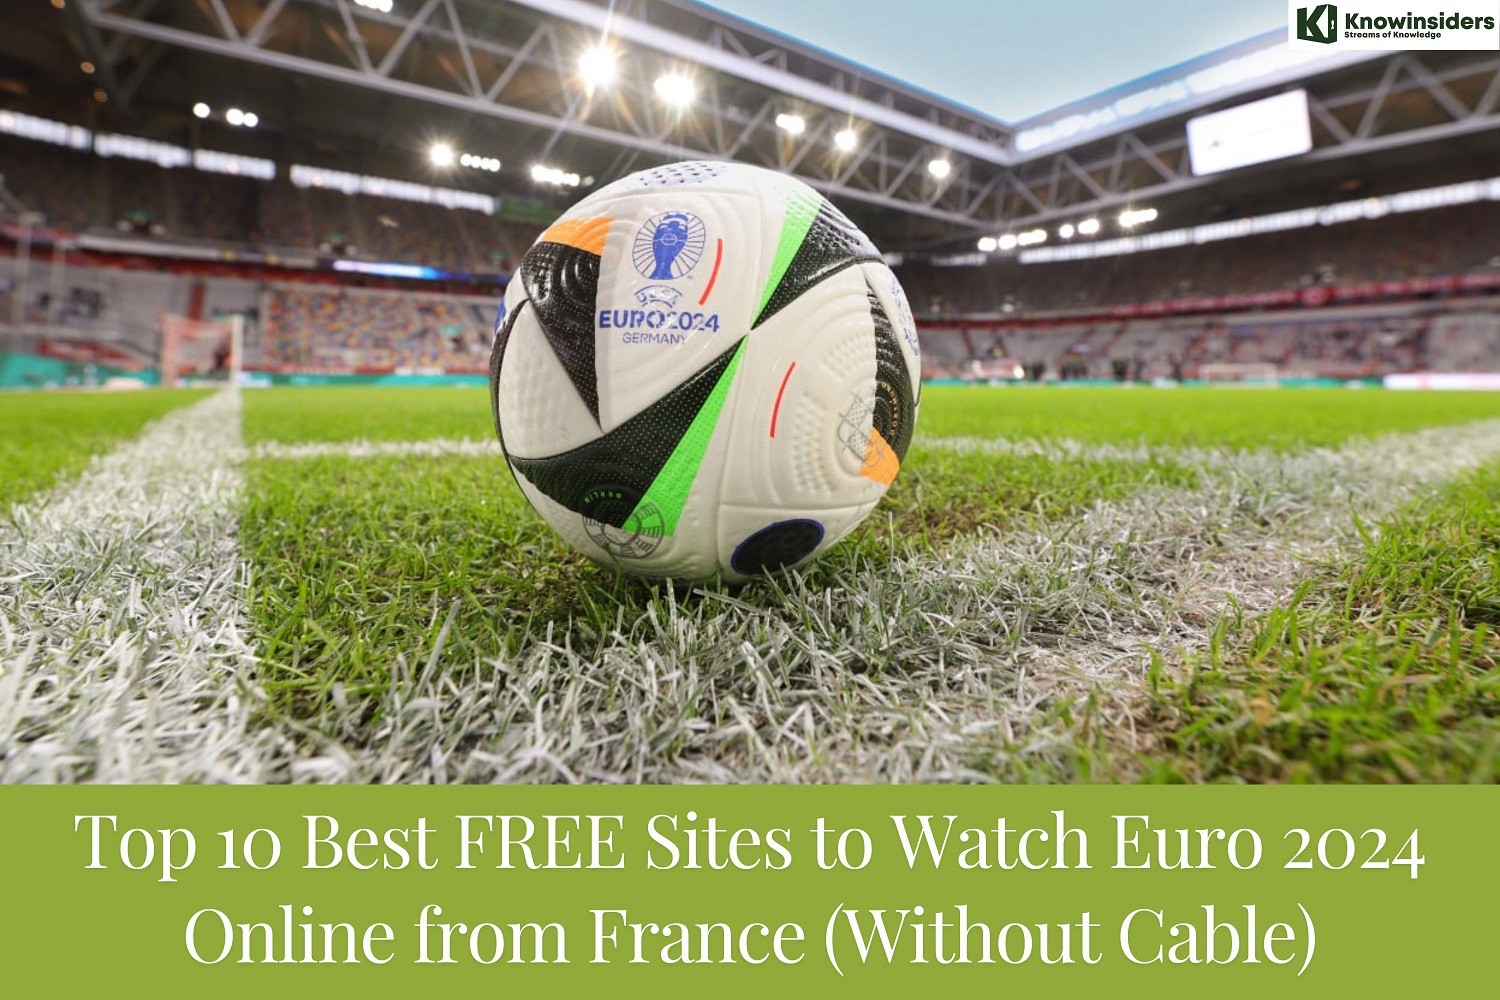 10 Best FREE Sites to Watch Euro 2024 in France (Without Cable)